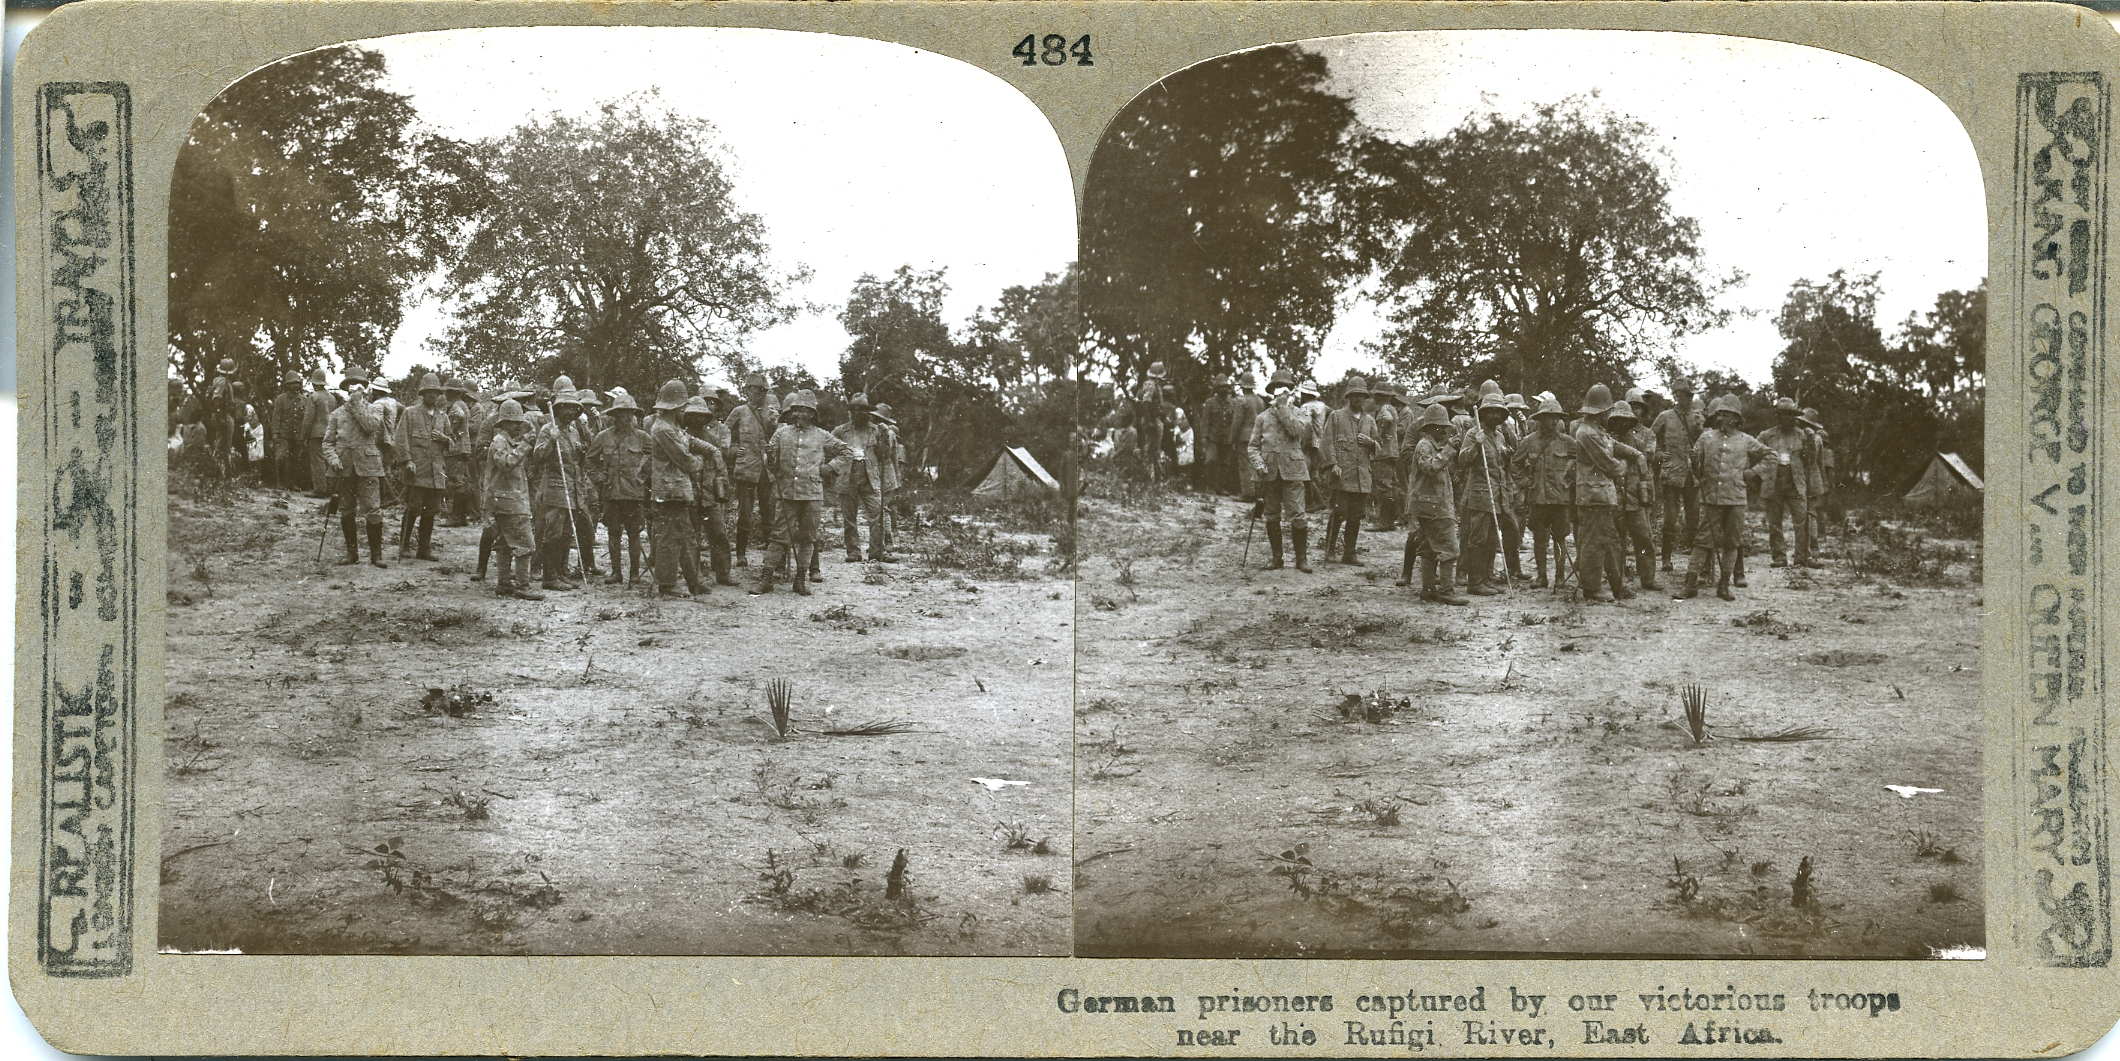 German prisoners captured by our victorious troops near the Rufigi River, East Africa